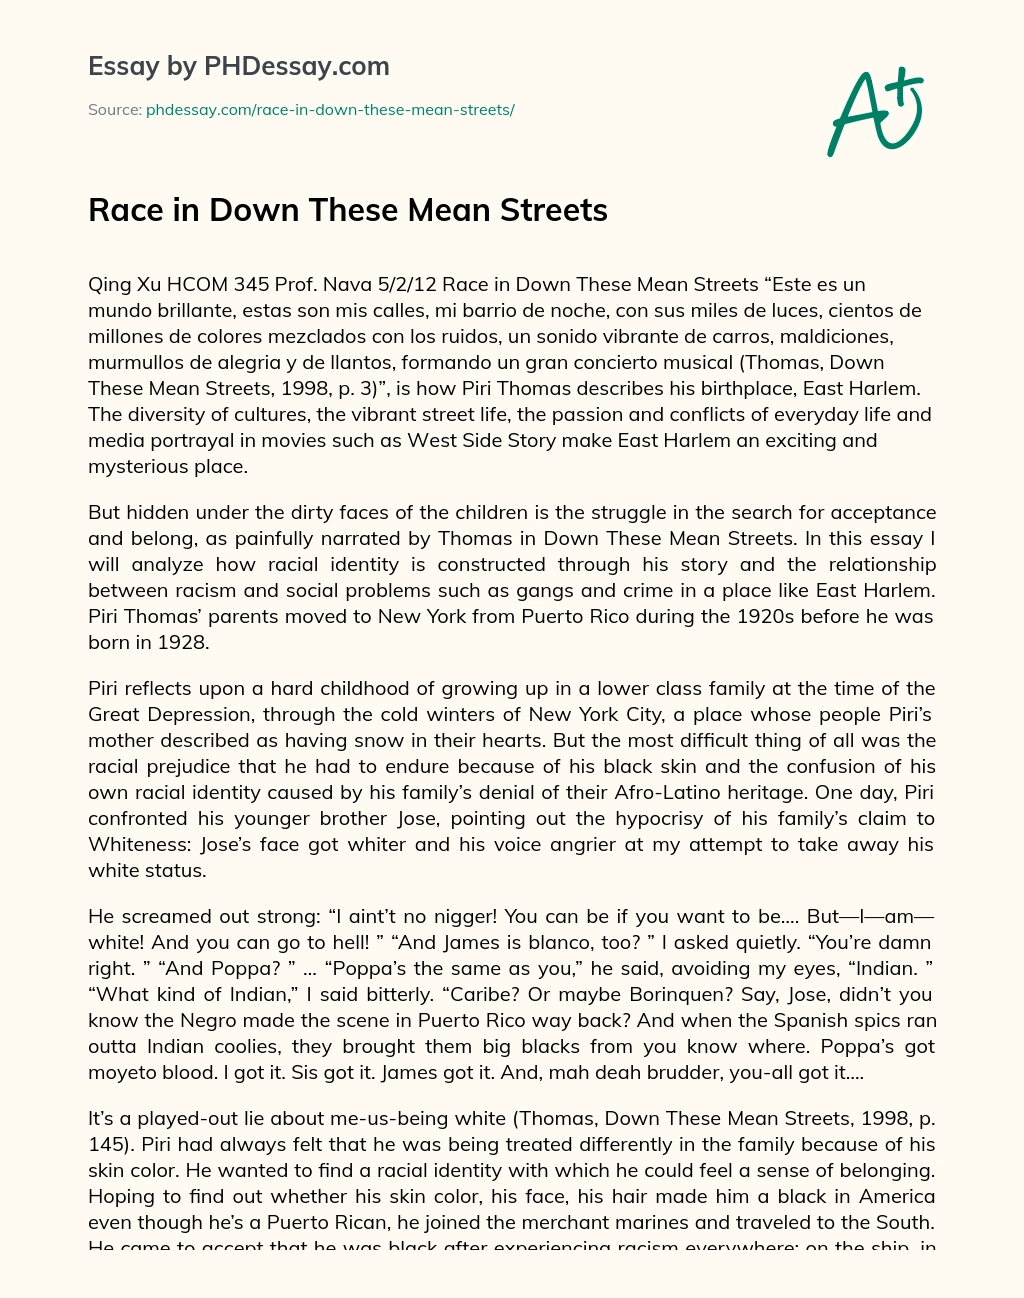 Race in Down These Mean Streets essay